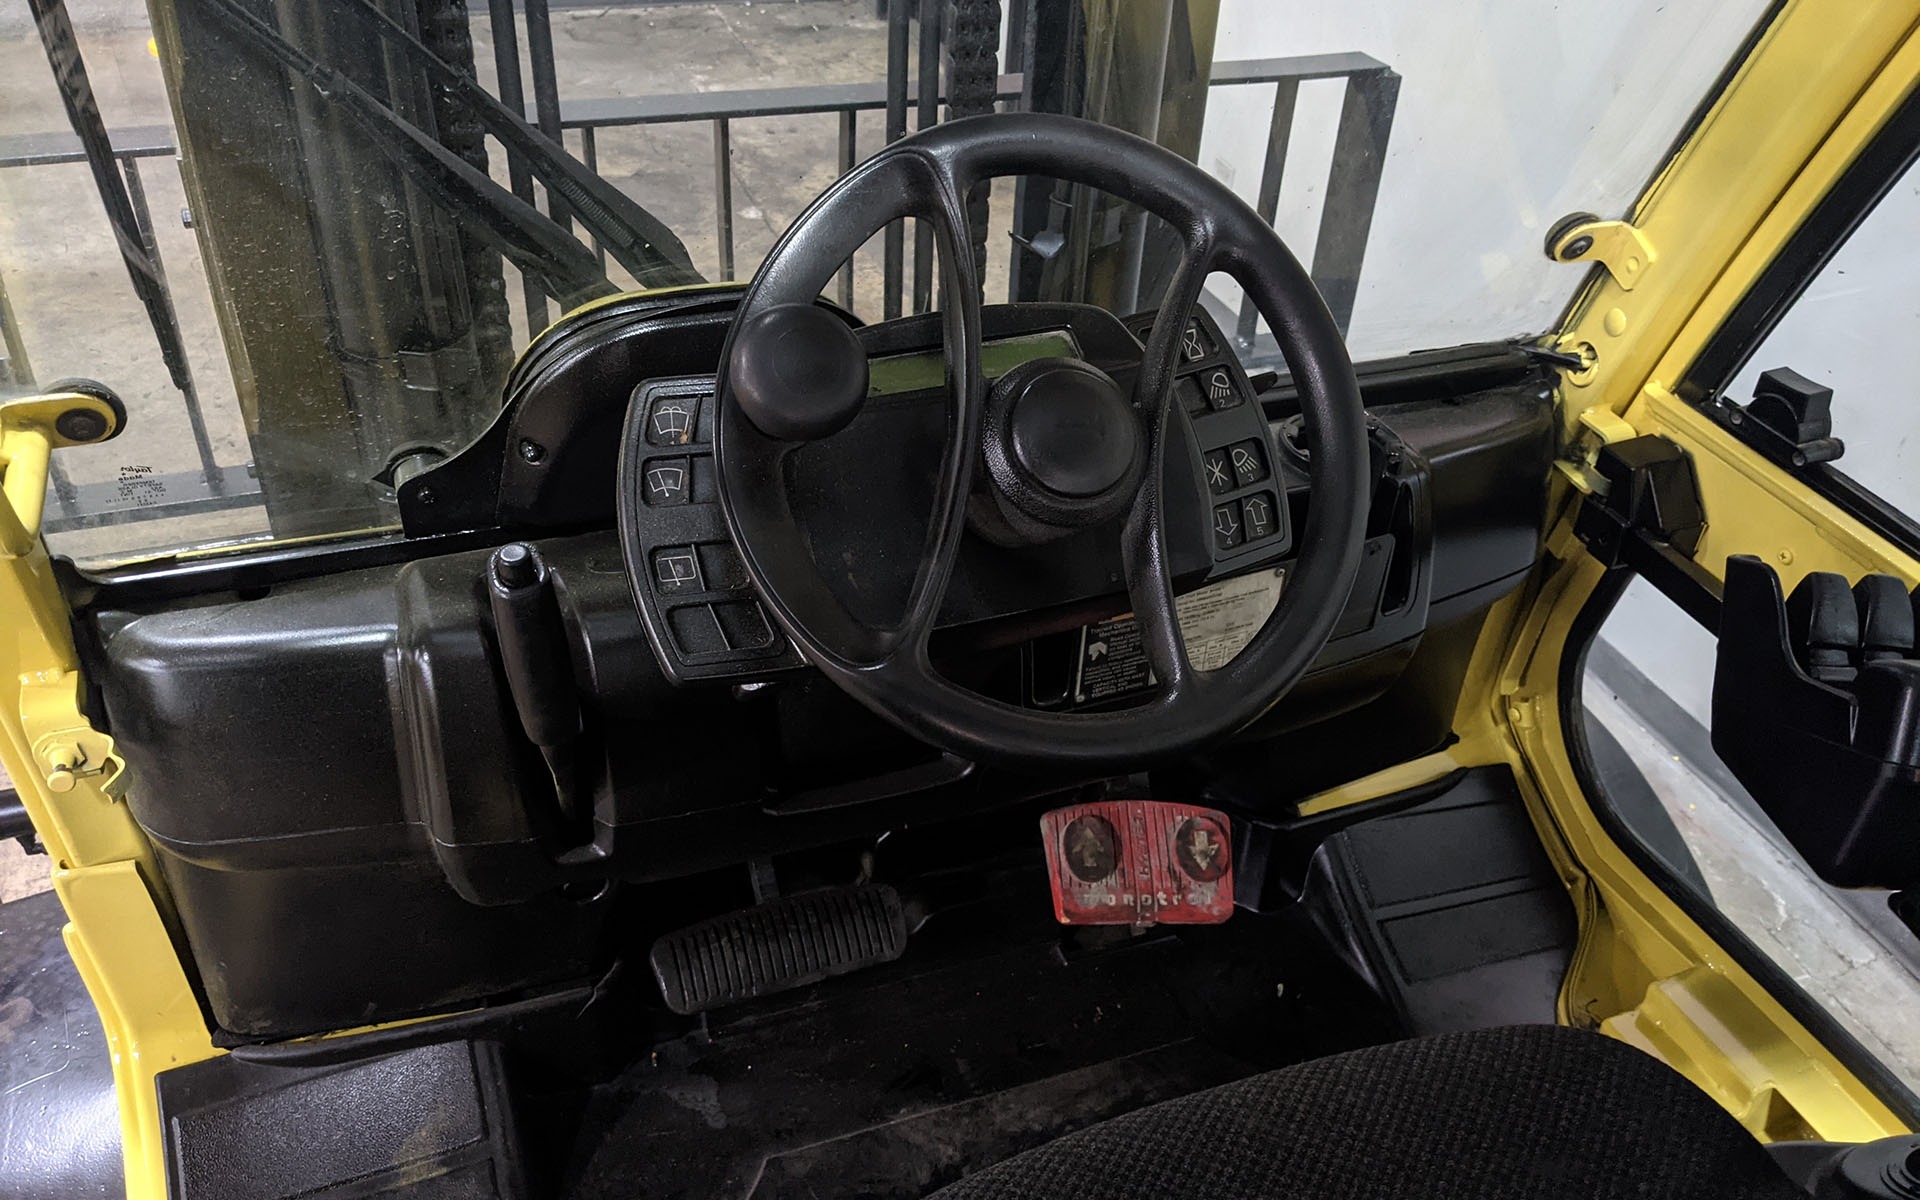 Used 2007 HYSTER H155FT  | Cary, IL